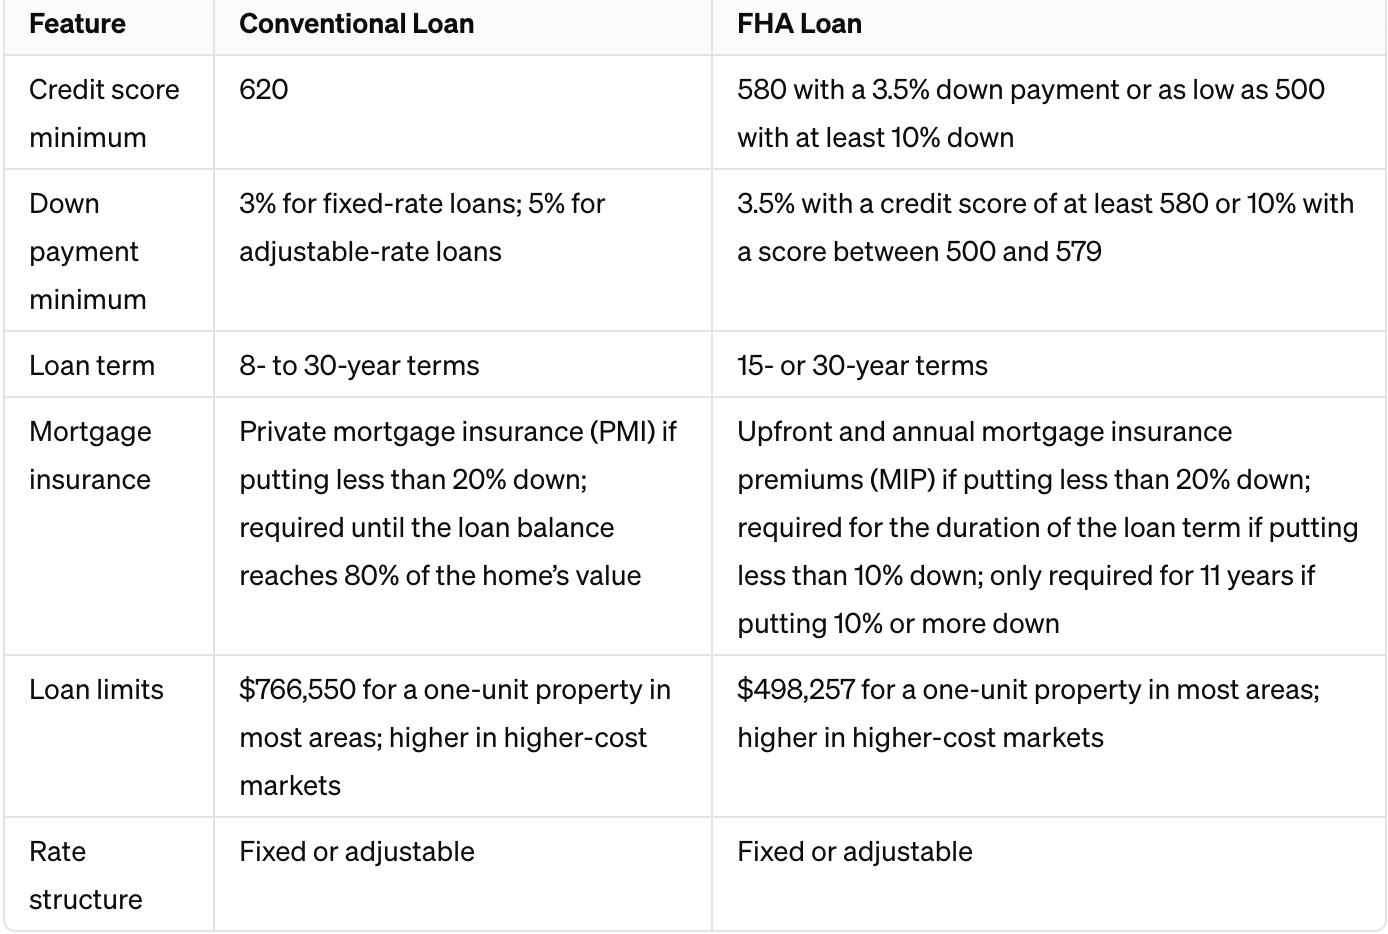 Comparing FHA Loans with Conventional Mortgages 